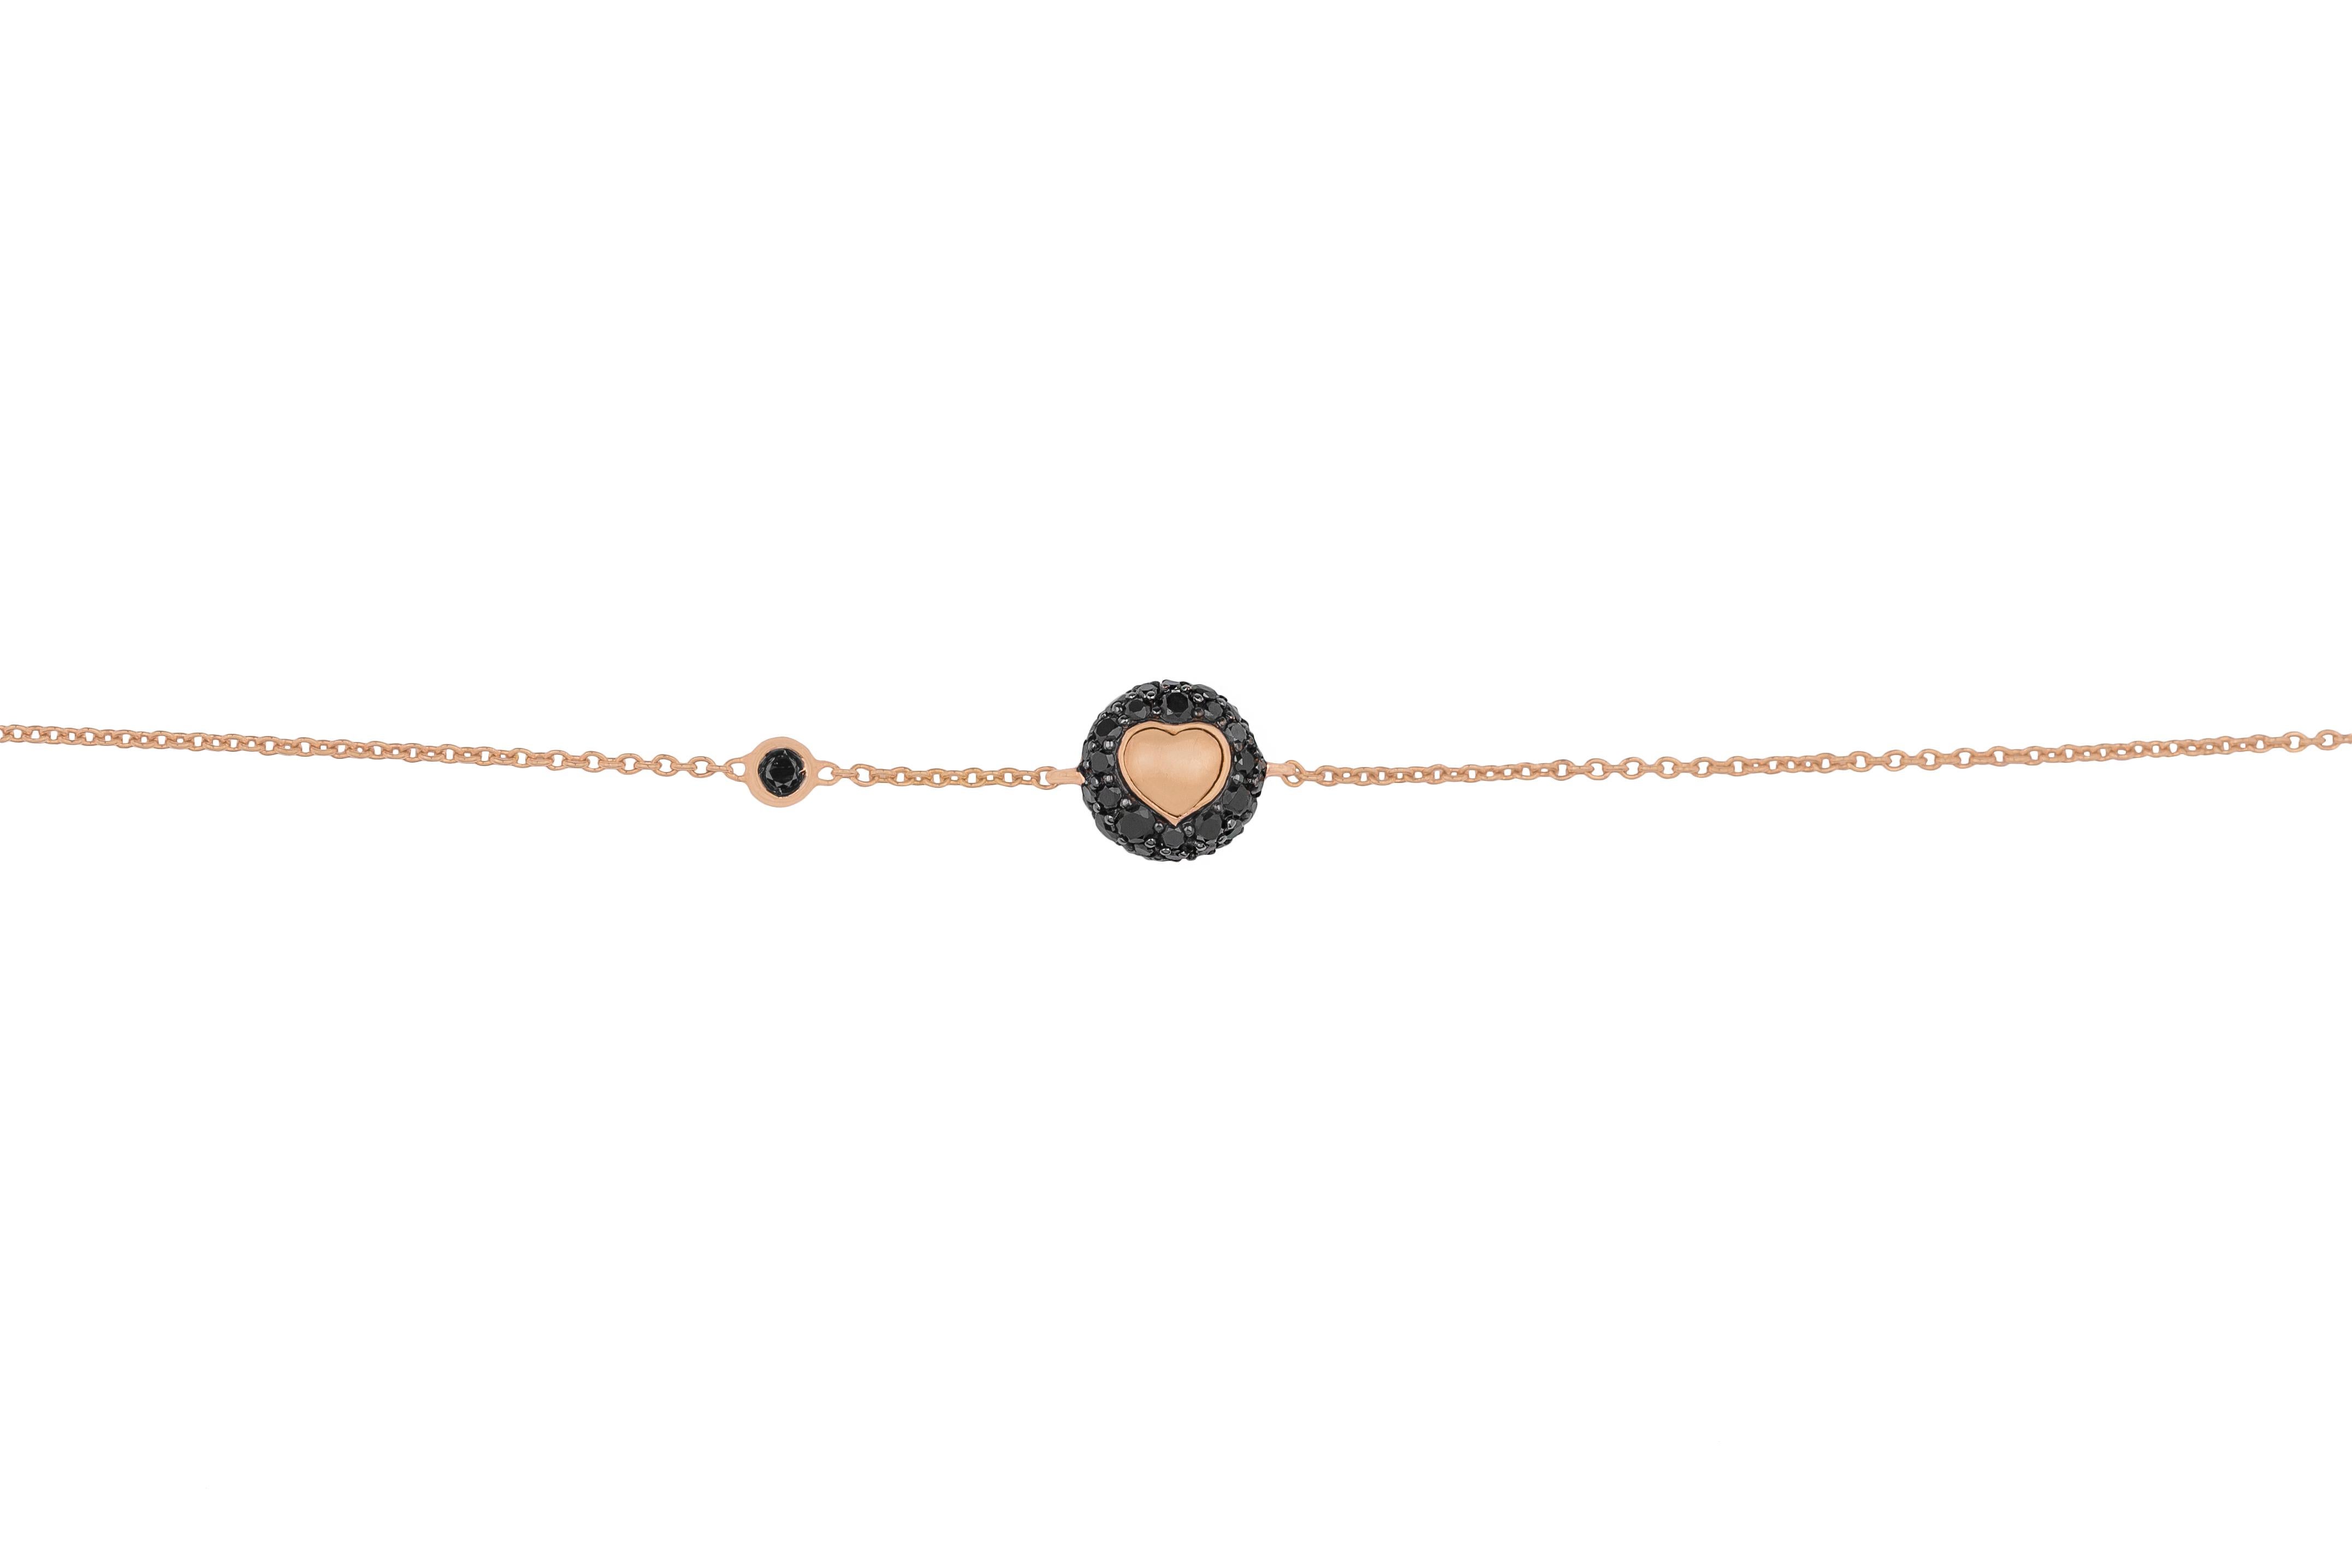 This 18K rose gold bracelet with black diamonds is made in Italy by Fanuele Gioielli.
It features a rose gold heart surrounded by brilliant-cut black diamonds, and a brilliant cut black diamond set in rose gold along the chain.
This bracelet has